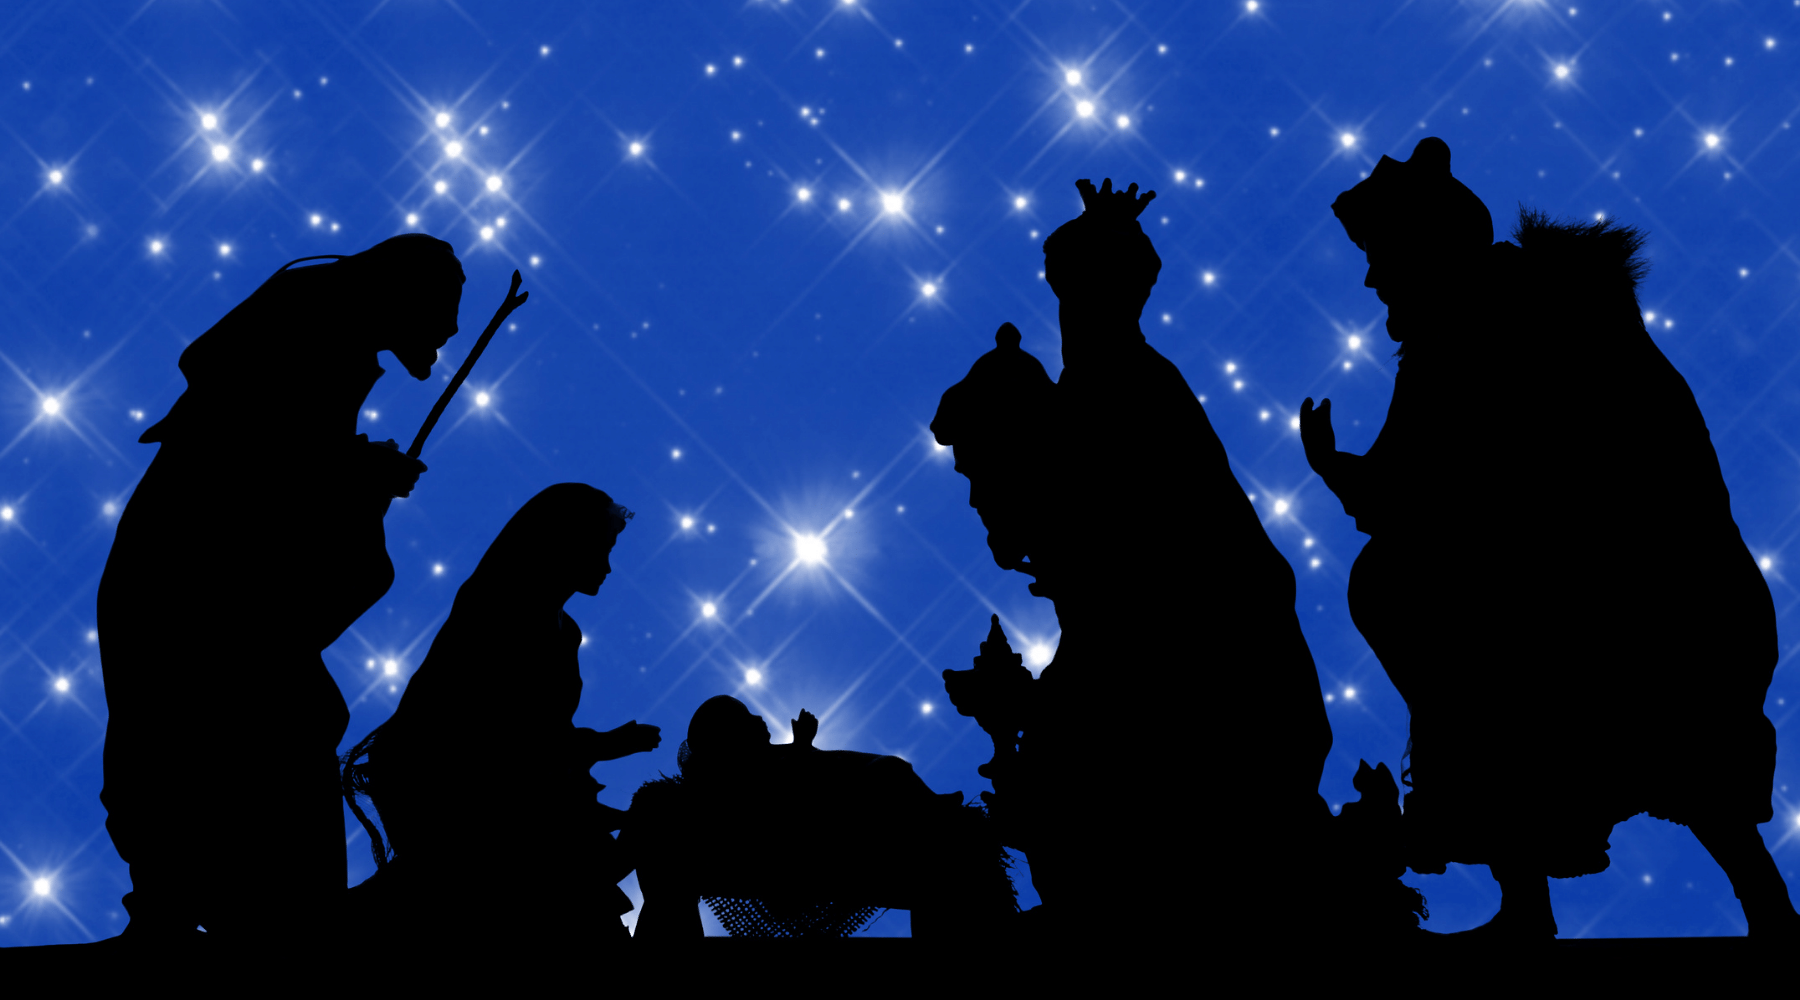 The 3 Wise Men Knew These Hair & Skin Benefits of Frankincense Oil